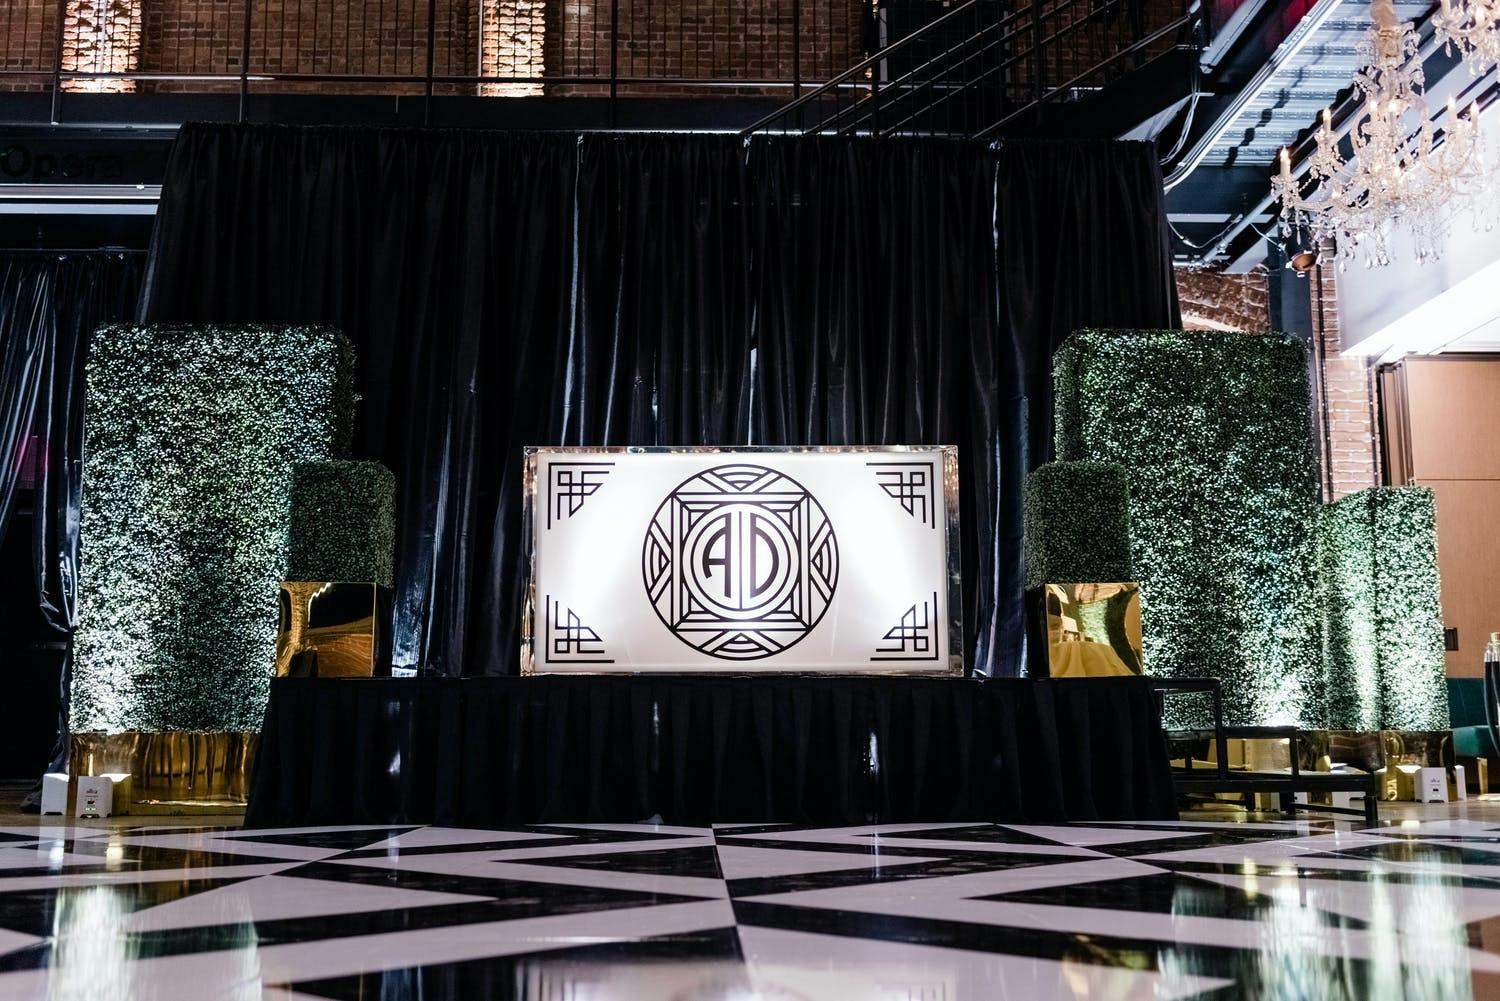 Black and White Wedding With Art Deco Dance Floor and Backdrop as Well as Boxwood Décor | PartySlate